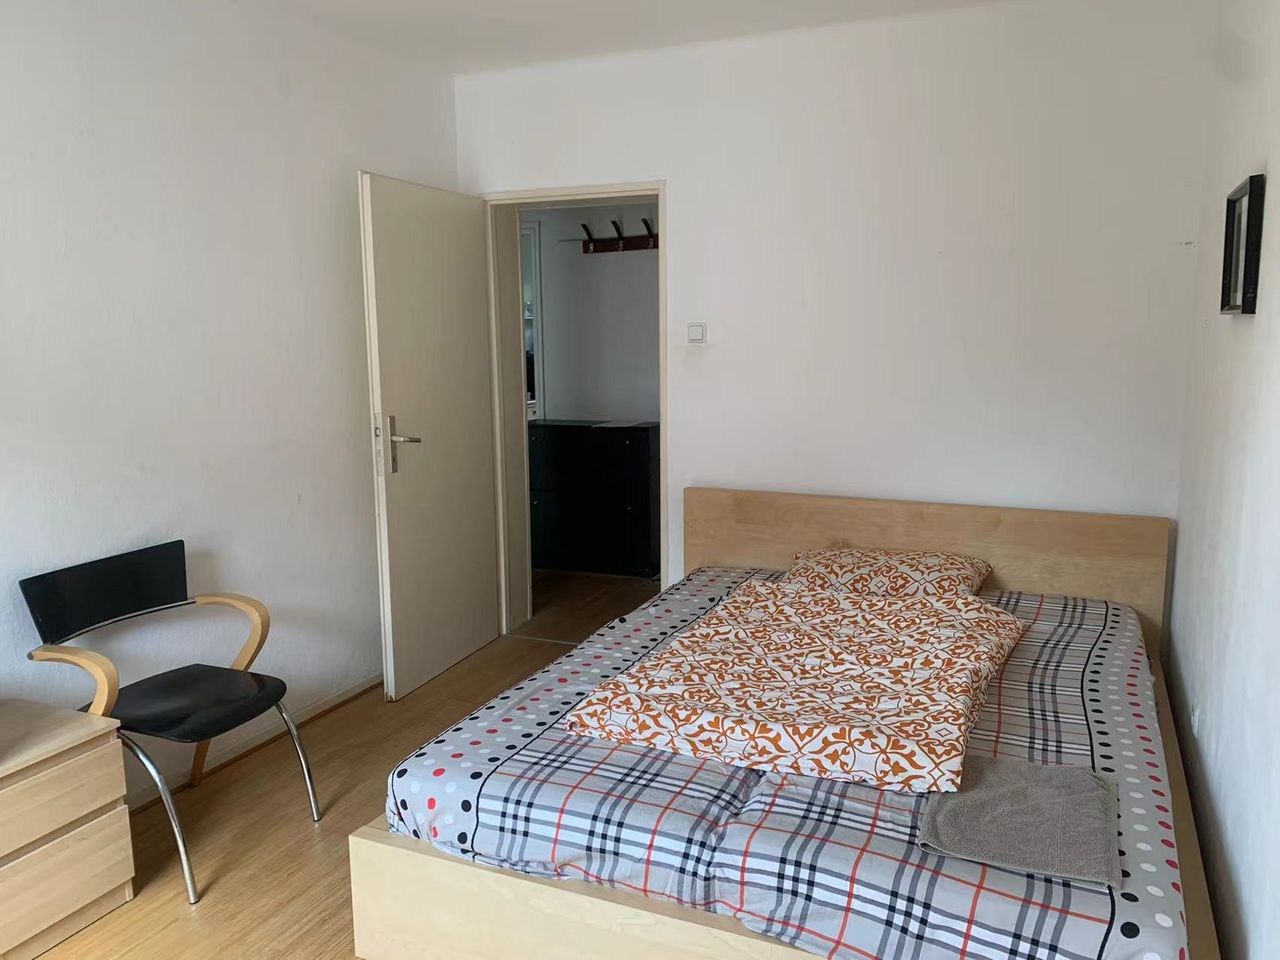 3 Room Appartment near Metro and Fair Ground